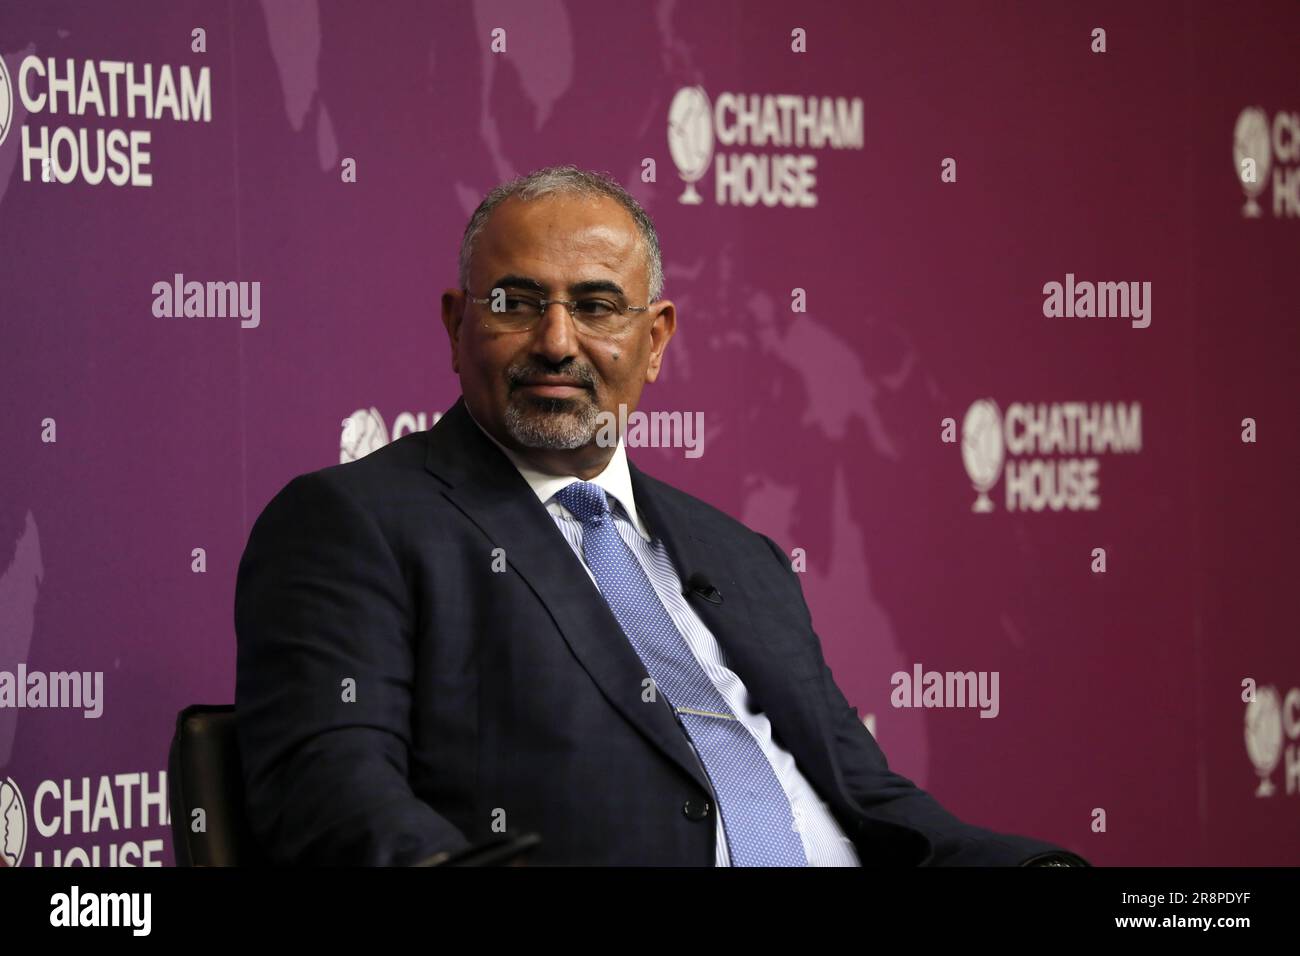 Yemen’s Southern Transitional Council (STC) President Major General Aidarous Qassem Al-Zubaidi at Chatham House in London, UK on 22 June 2023 Stock Photo